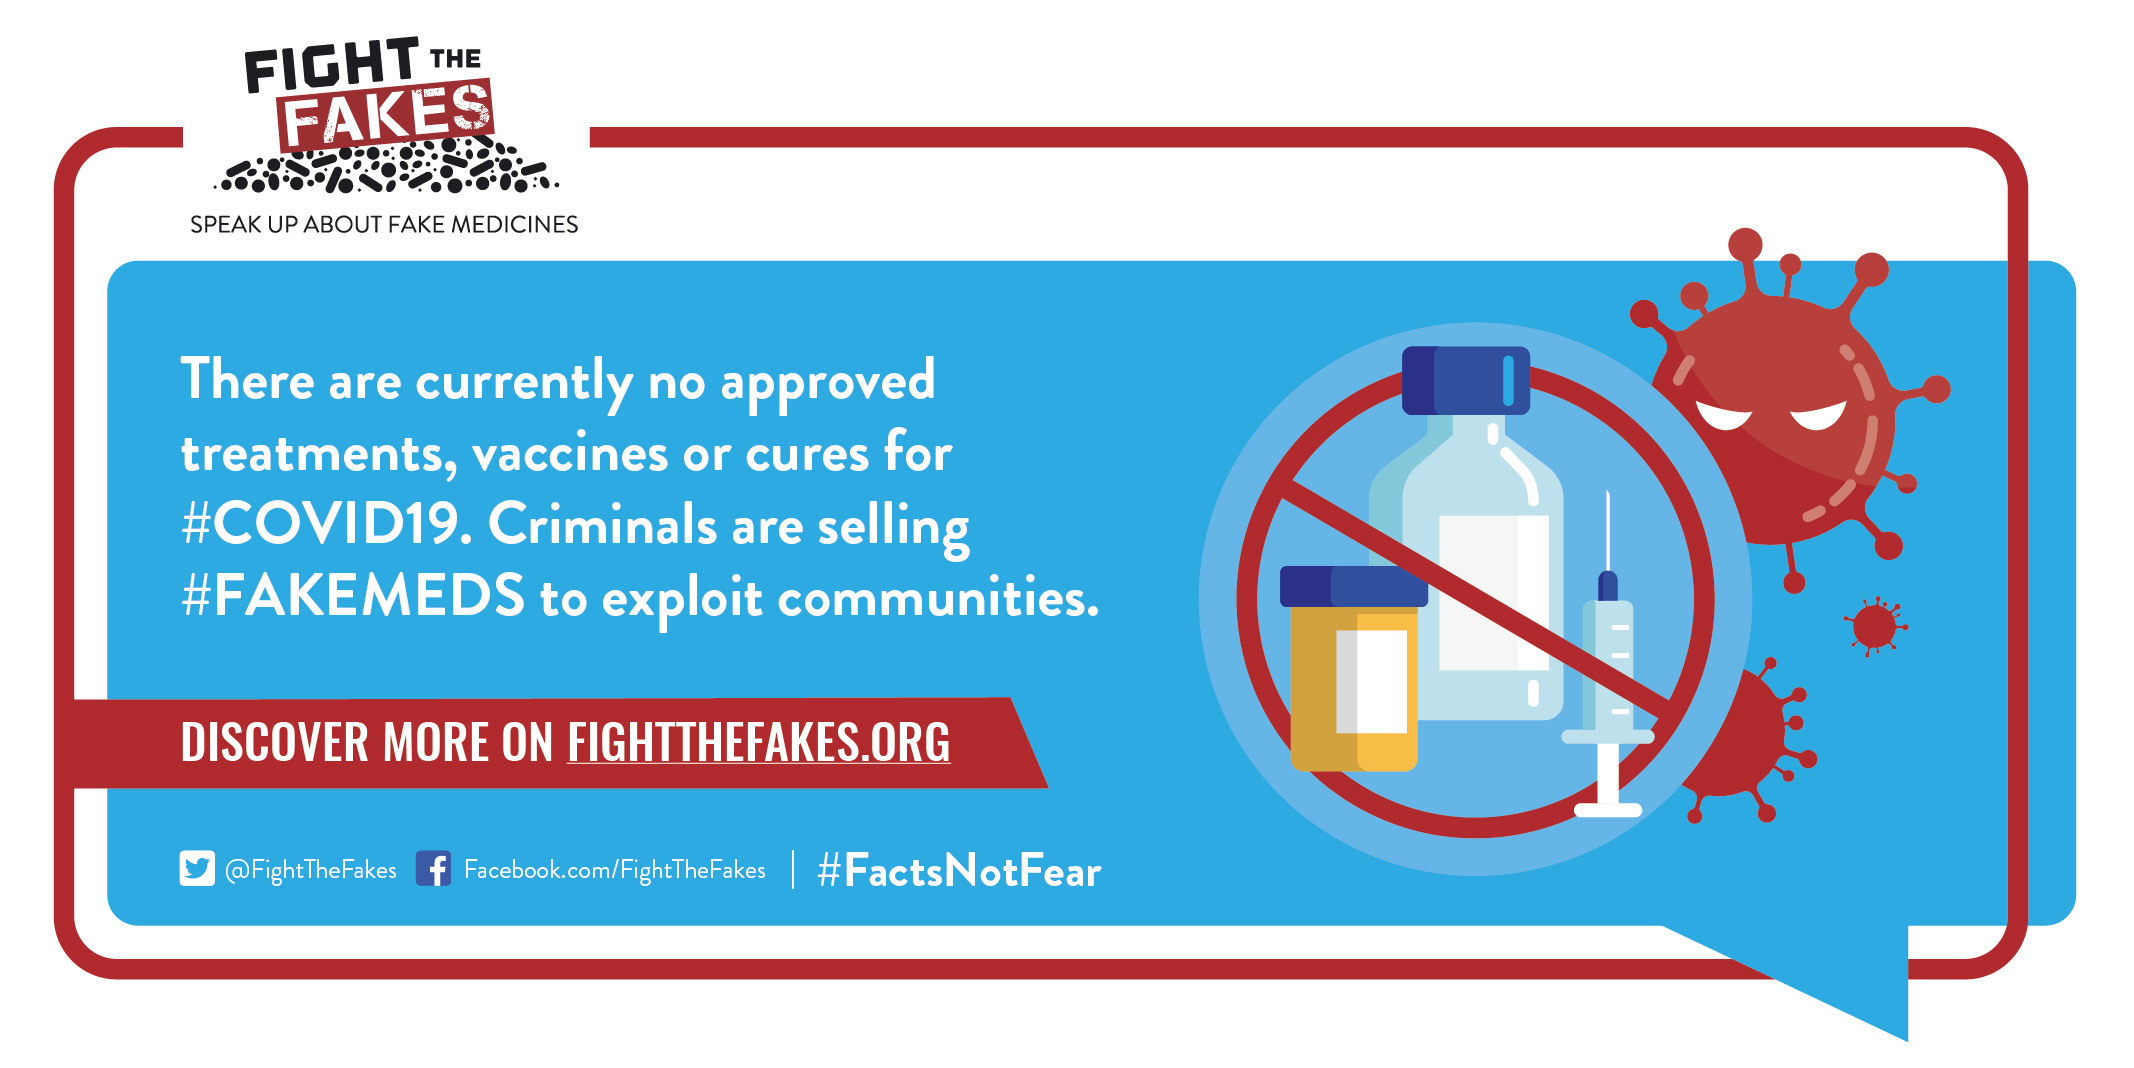 Fight The Fakes Speak Up About Fake Medicines